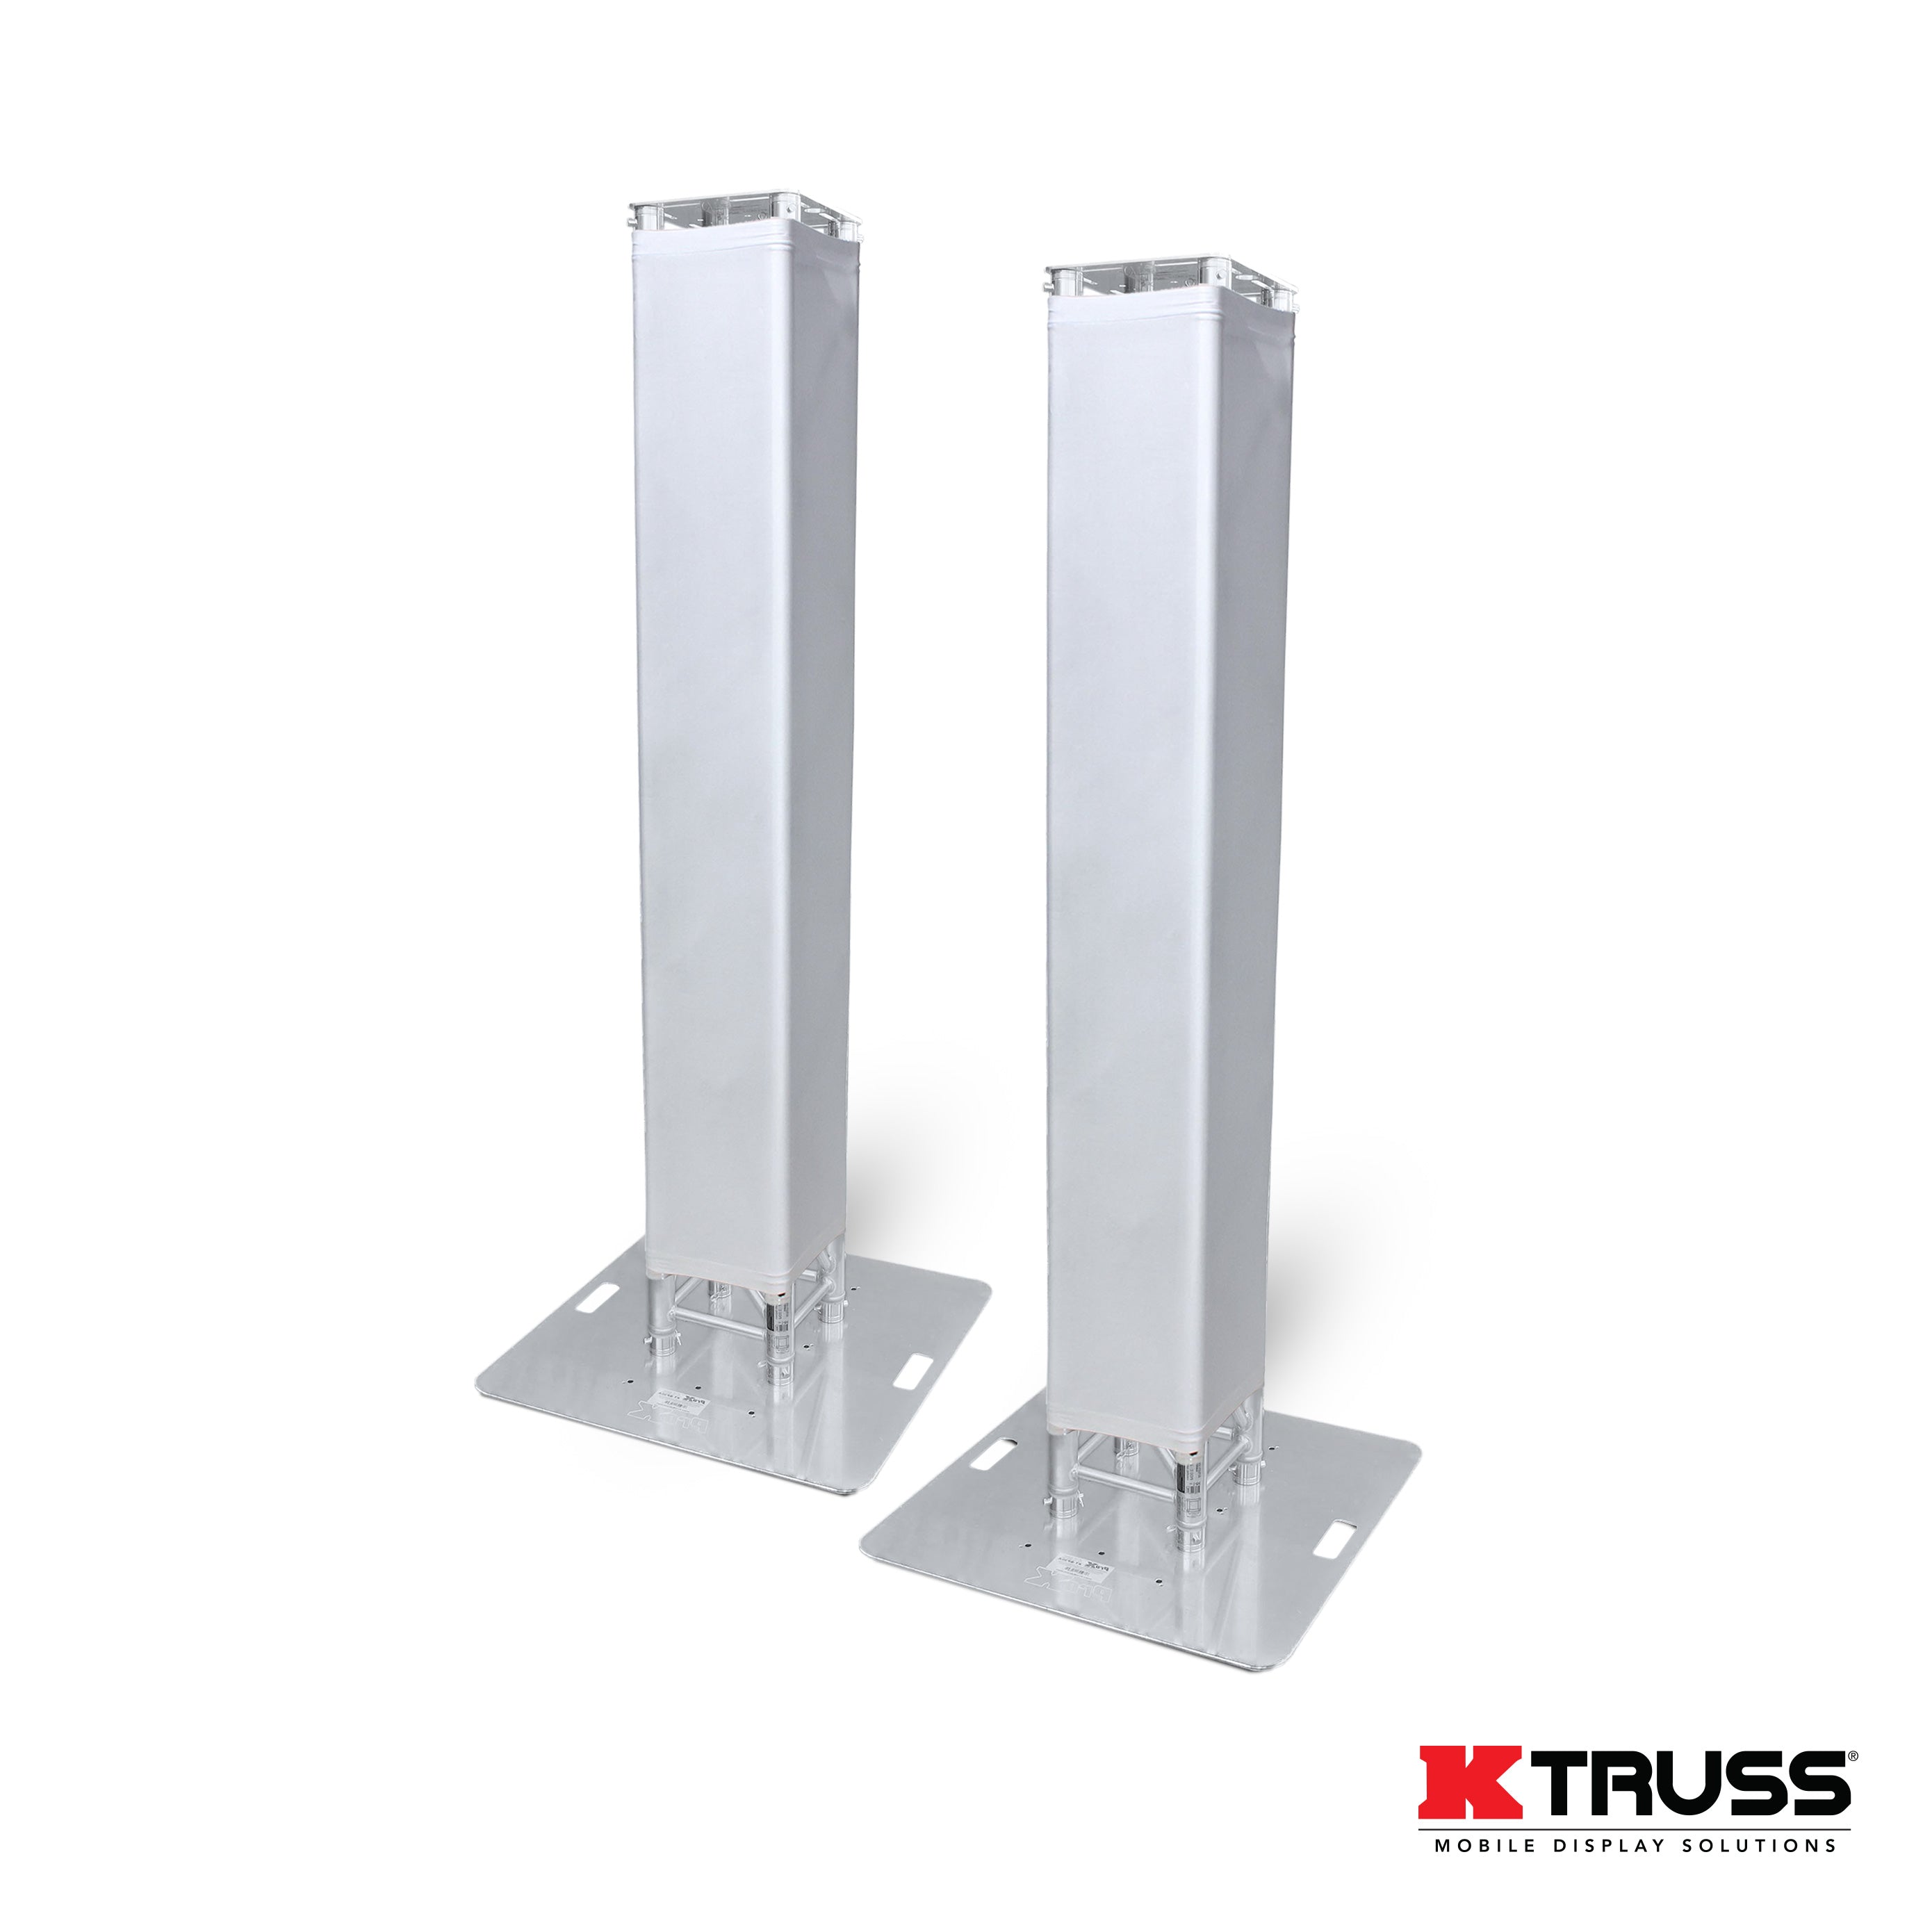 Pro X K-Truss 8.20 Lightweight Square Truss Totem Full Package Includes White Scrim, Top Plate and Base Plate KT-SQ820TOTEMTCX2